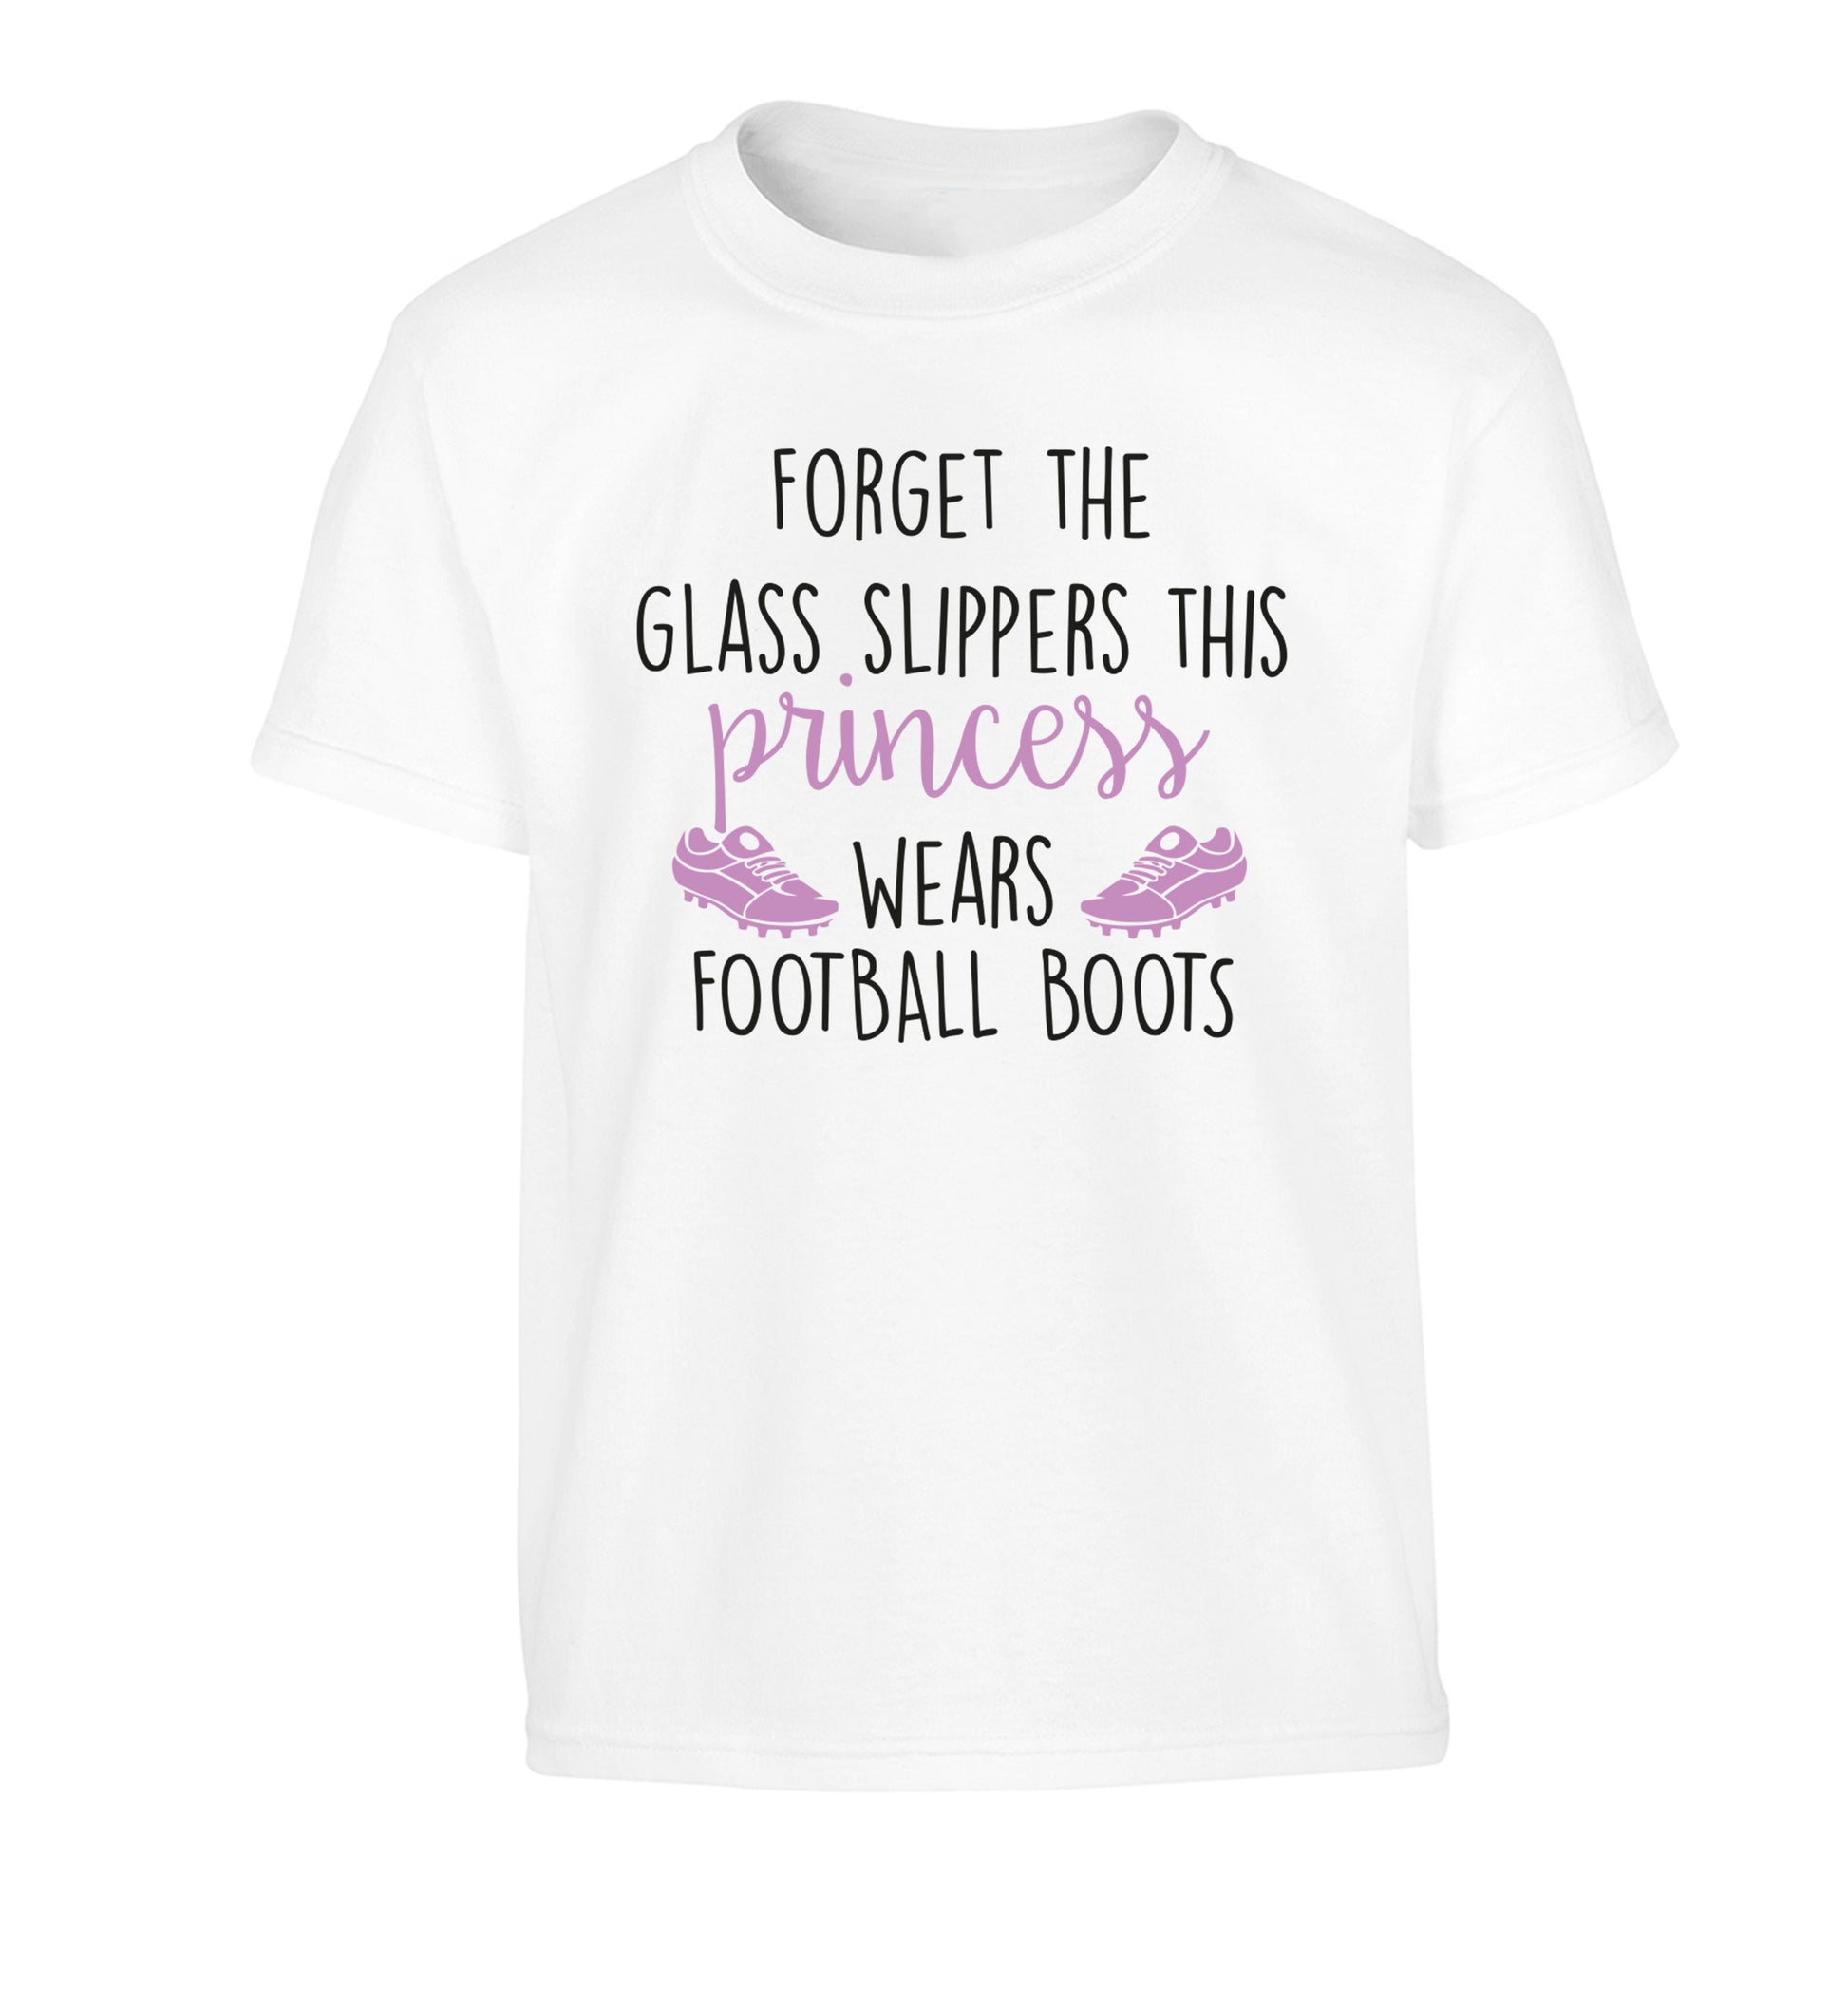 Forget the glass slippers this princess wears football boots Children's white Tshirt 12-14 Years